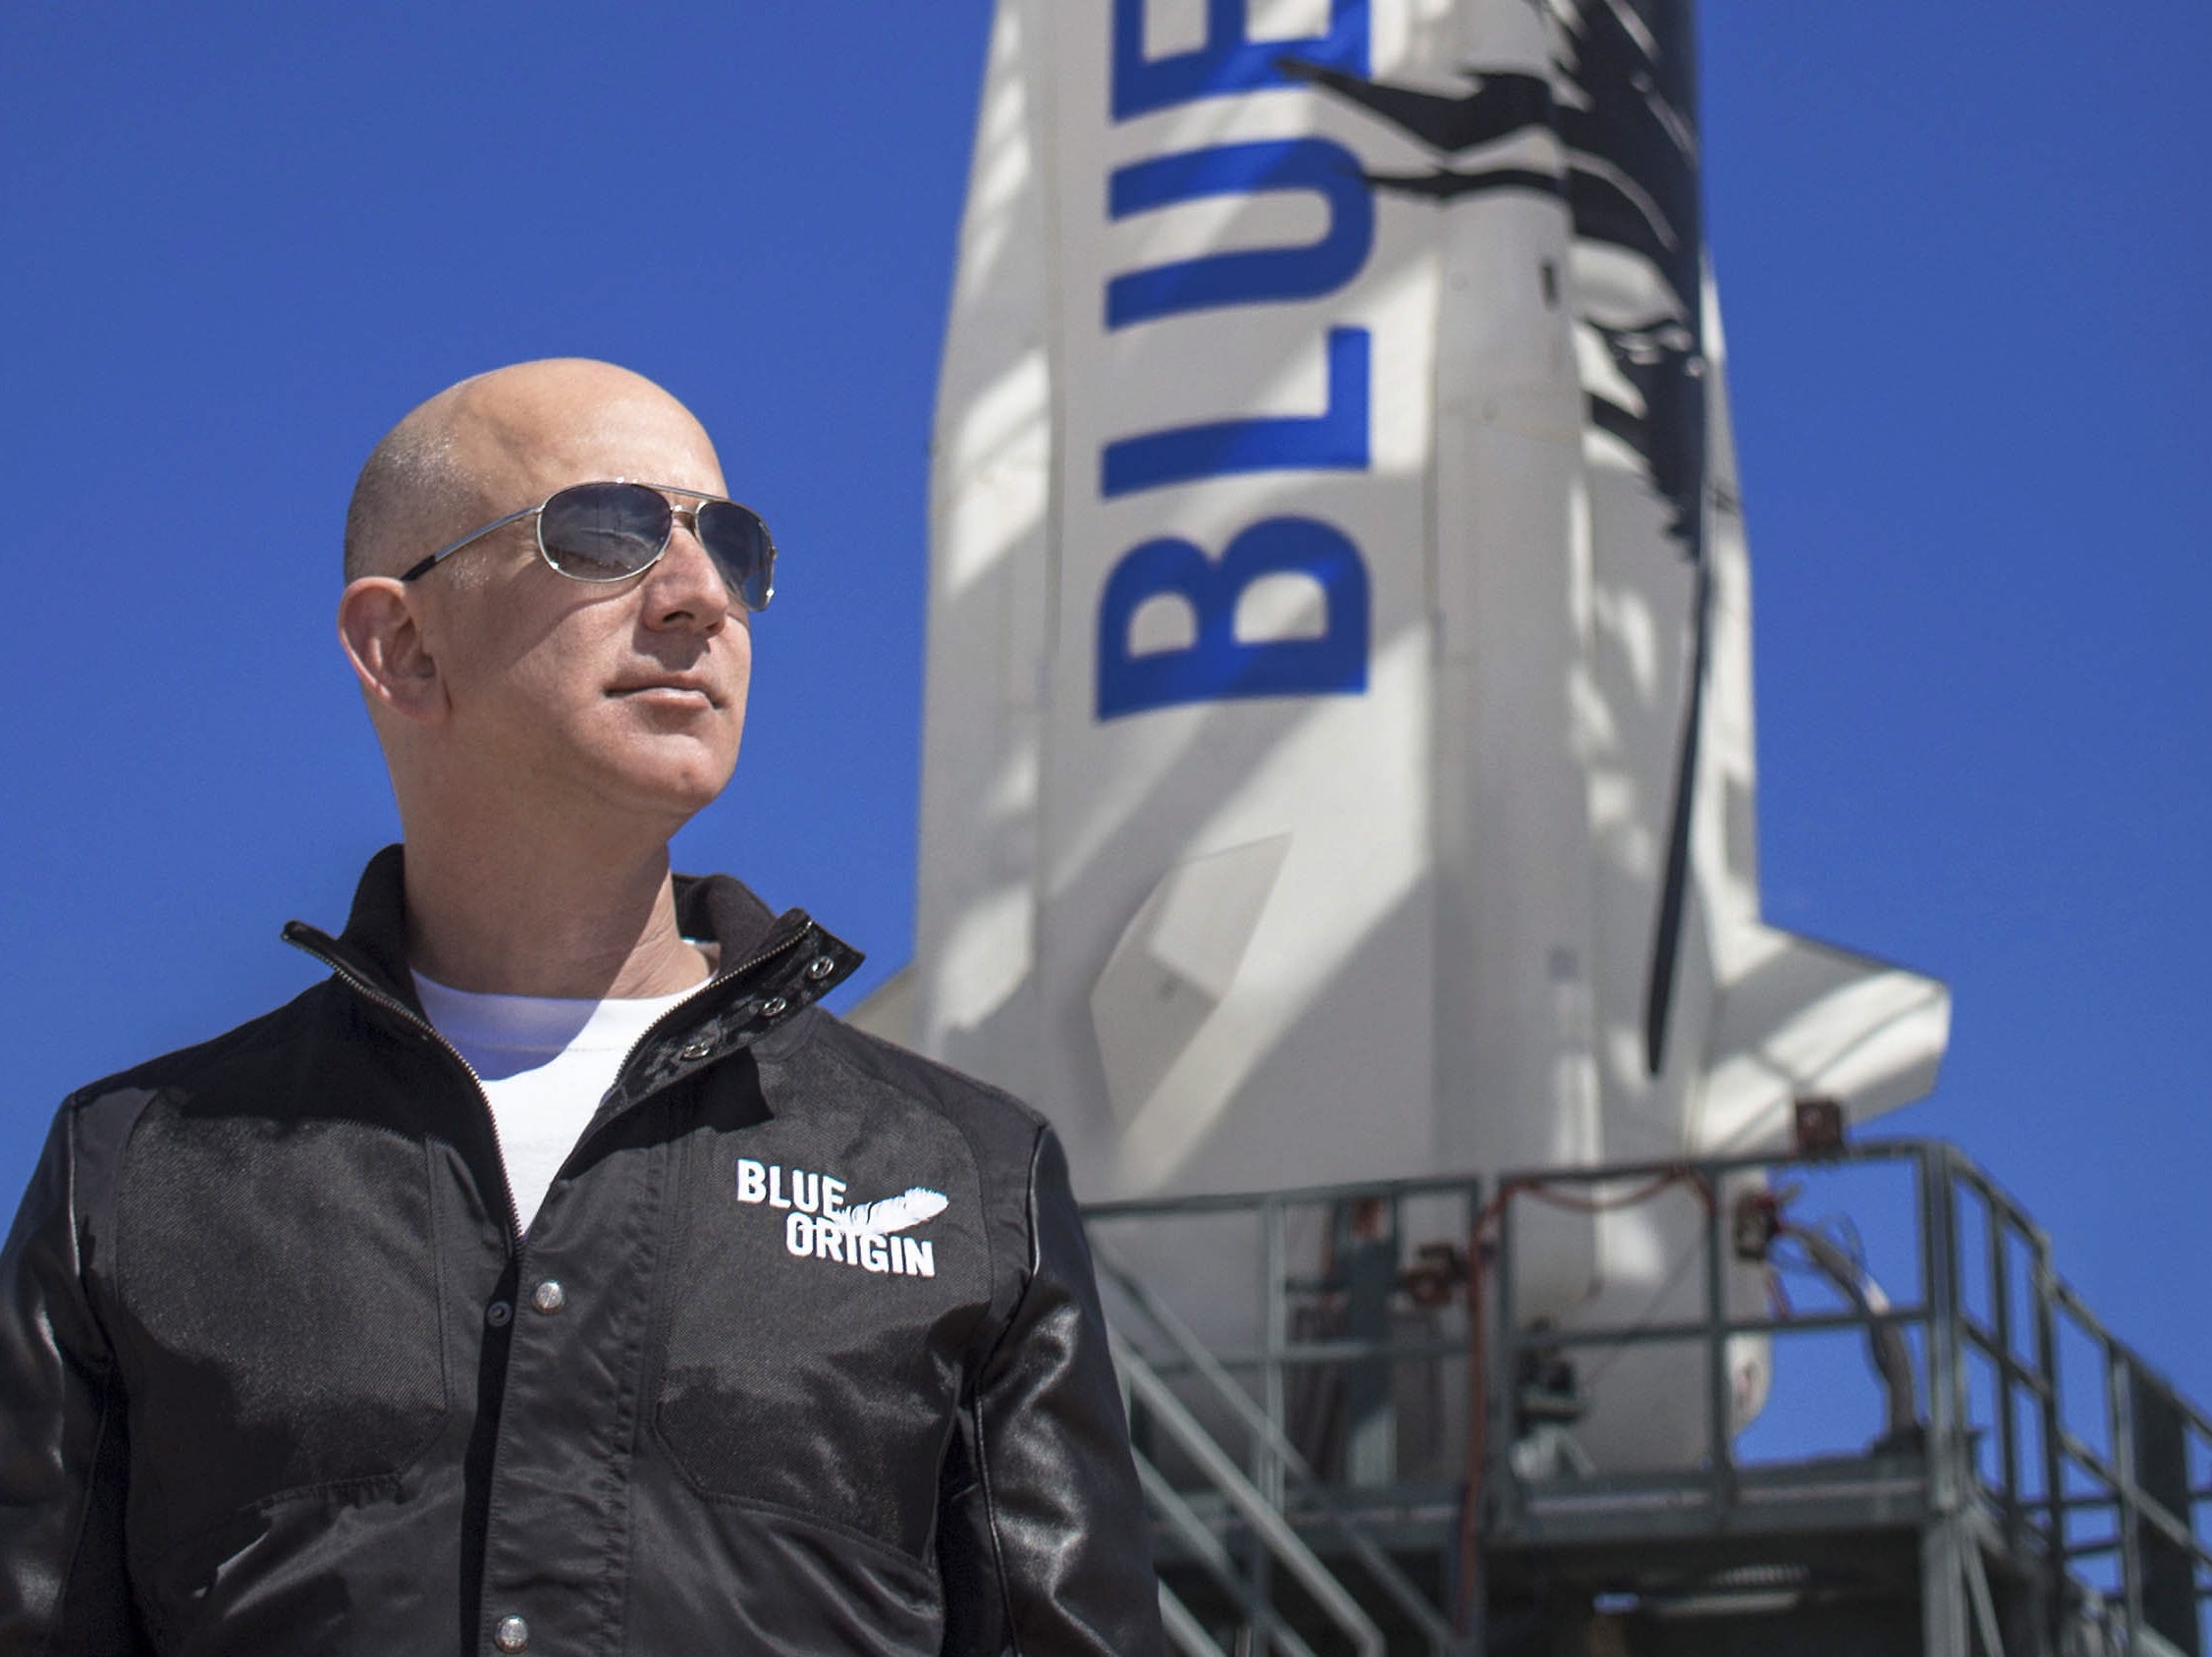 Bezos inspects New Shepard’s west Texas launch facility before his Blue Orbit rocket’s maiden voyage